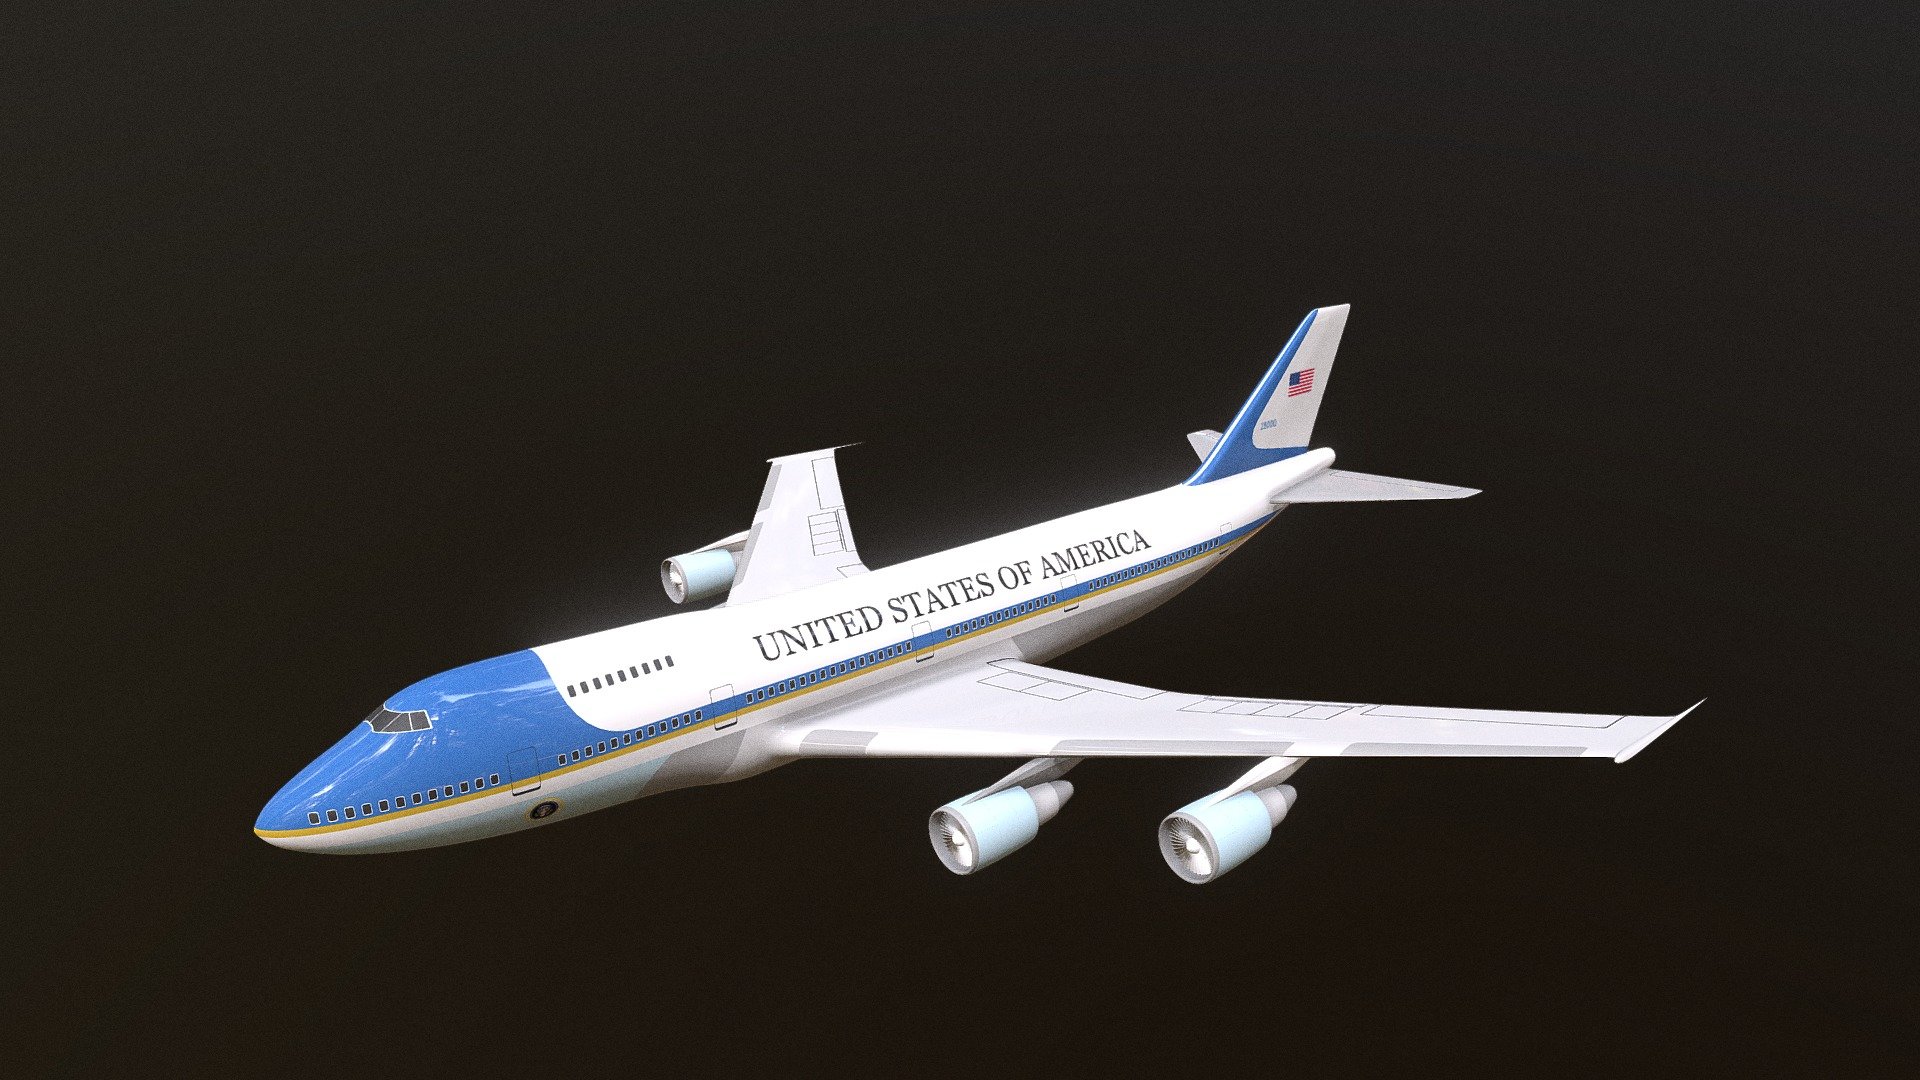 Boeing 747 Air Force One. The plane used by the president of the United States of America. some details arent included cause im lazy like the stuff on the nose and parts on the top and no landing gear.
(now free to download) - Air Force One - Download Free 3D model by agreene (@davidre) 3d model